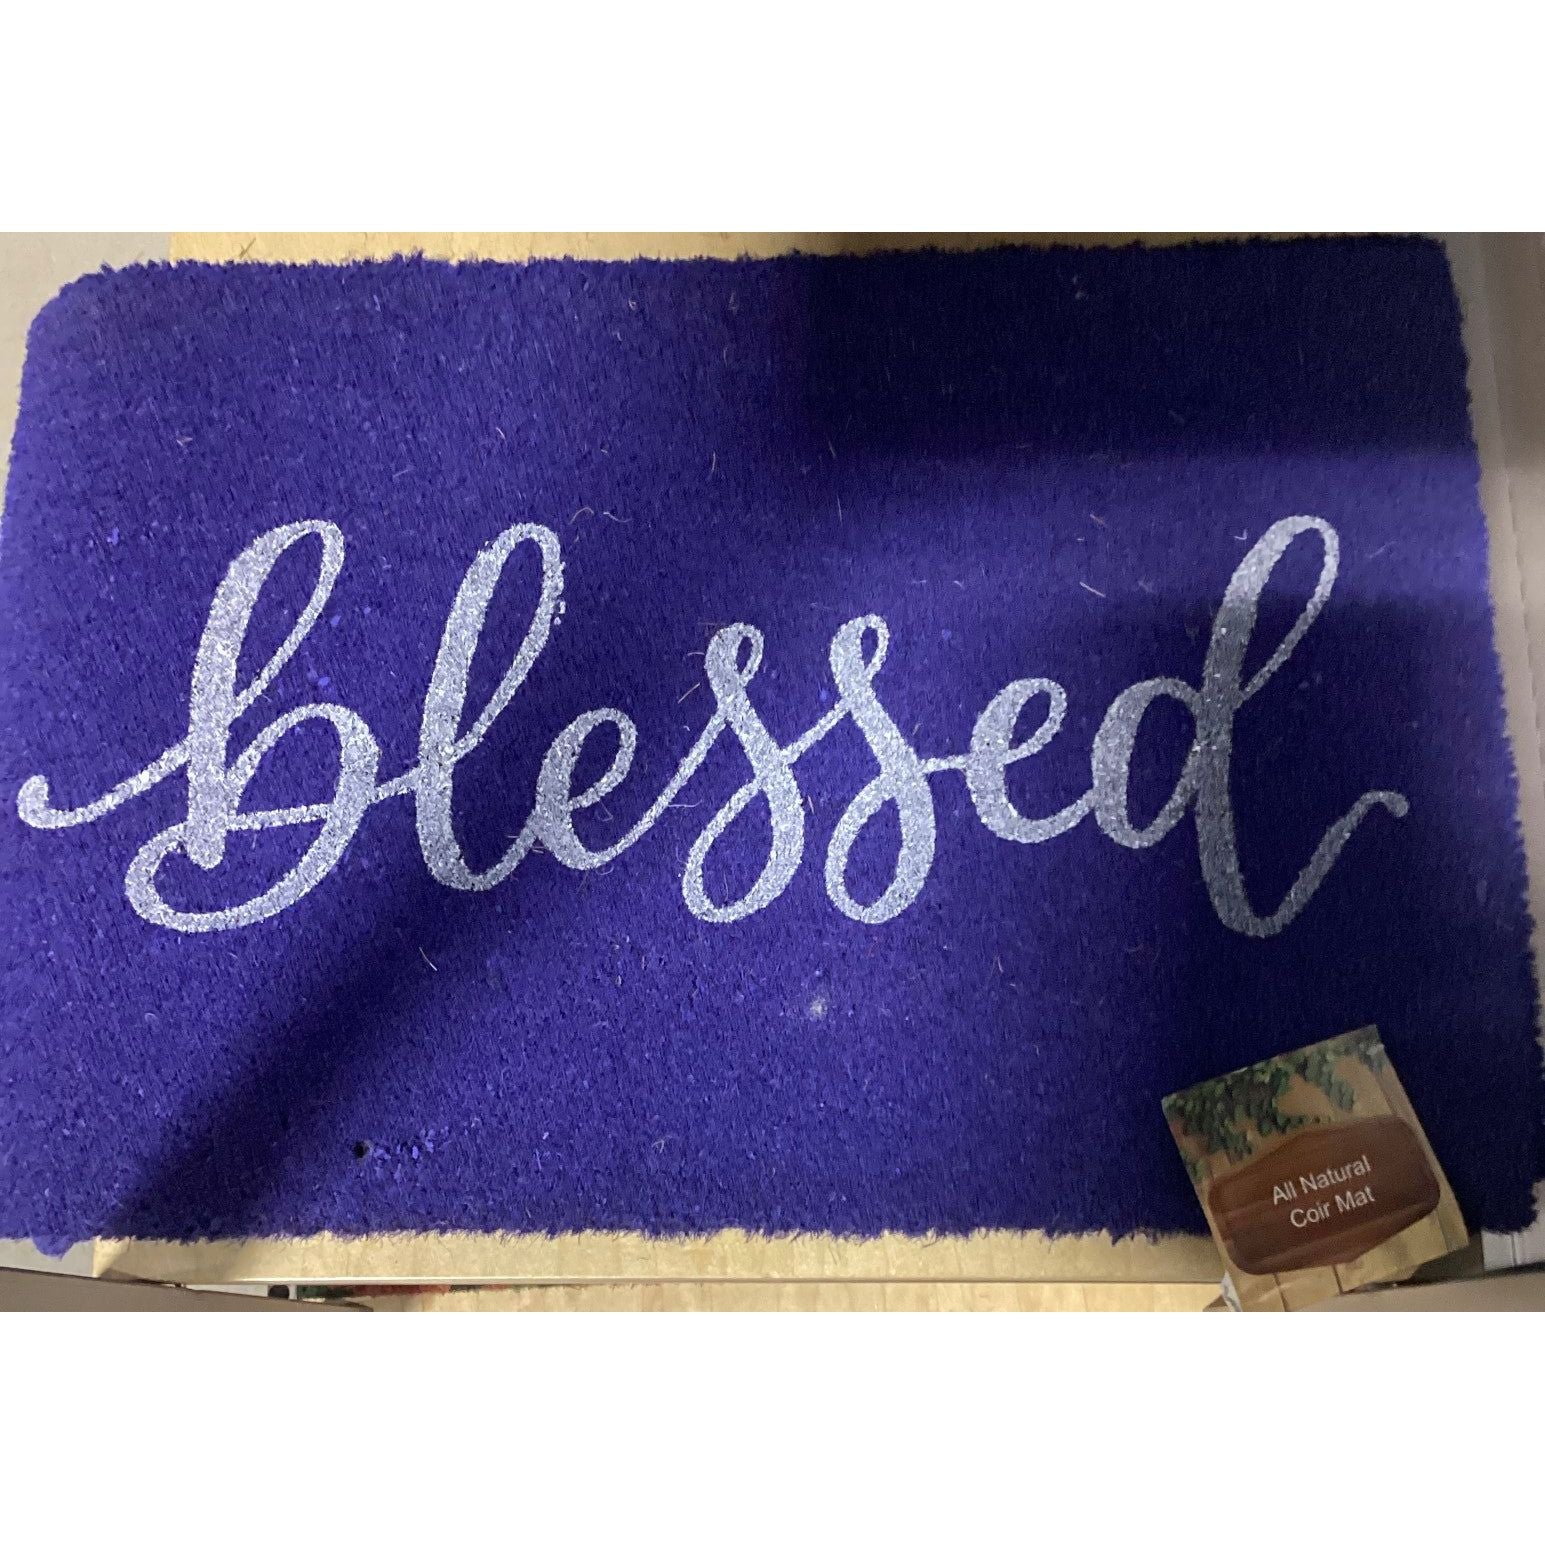 Blue mat that reads "blessed"